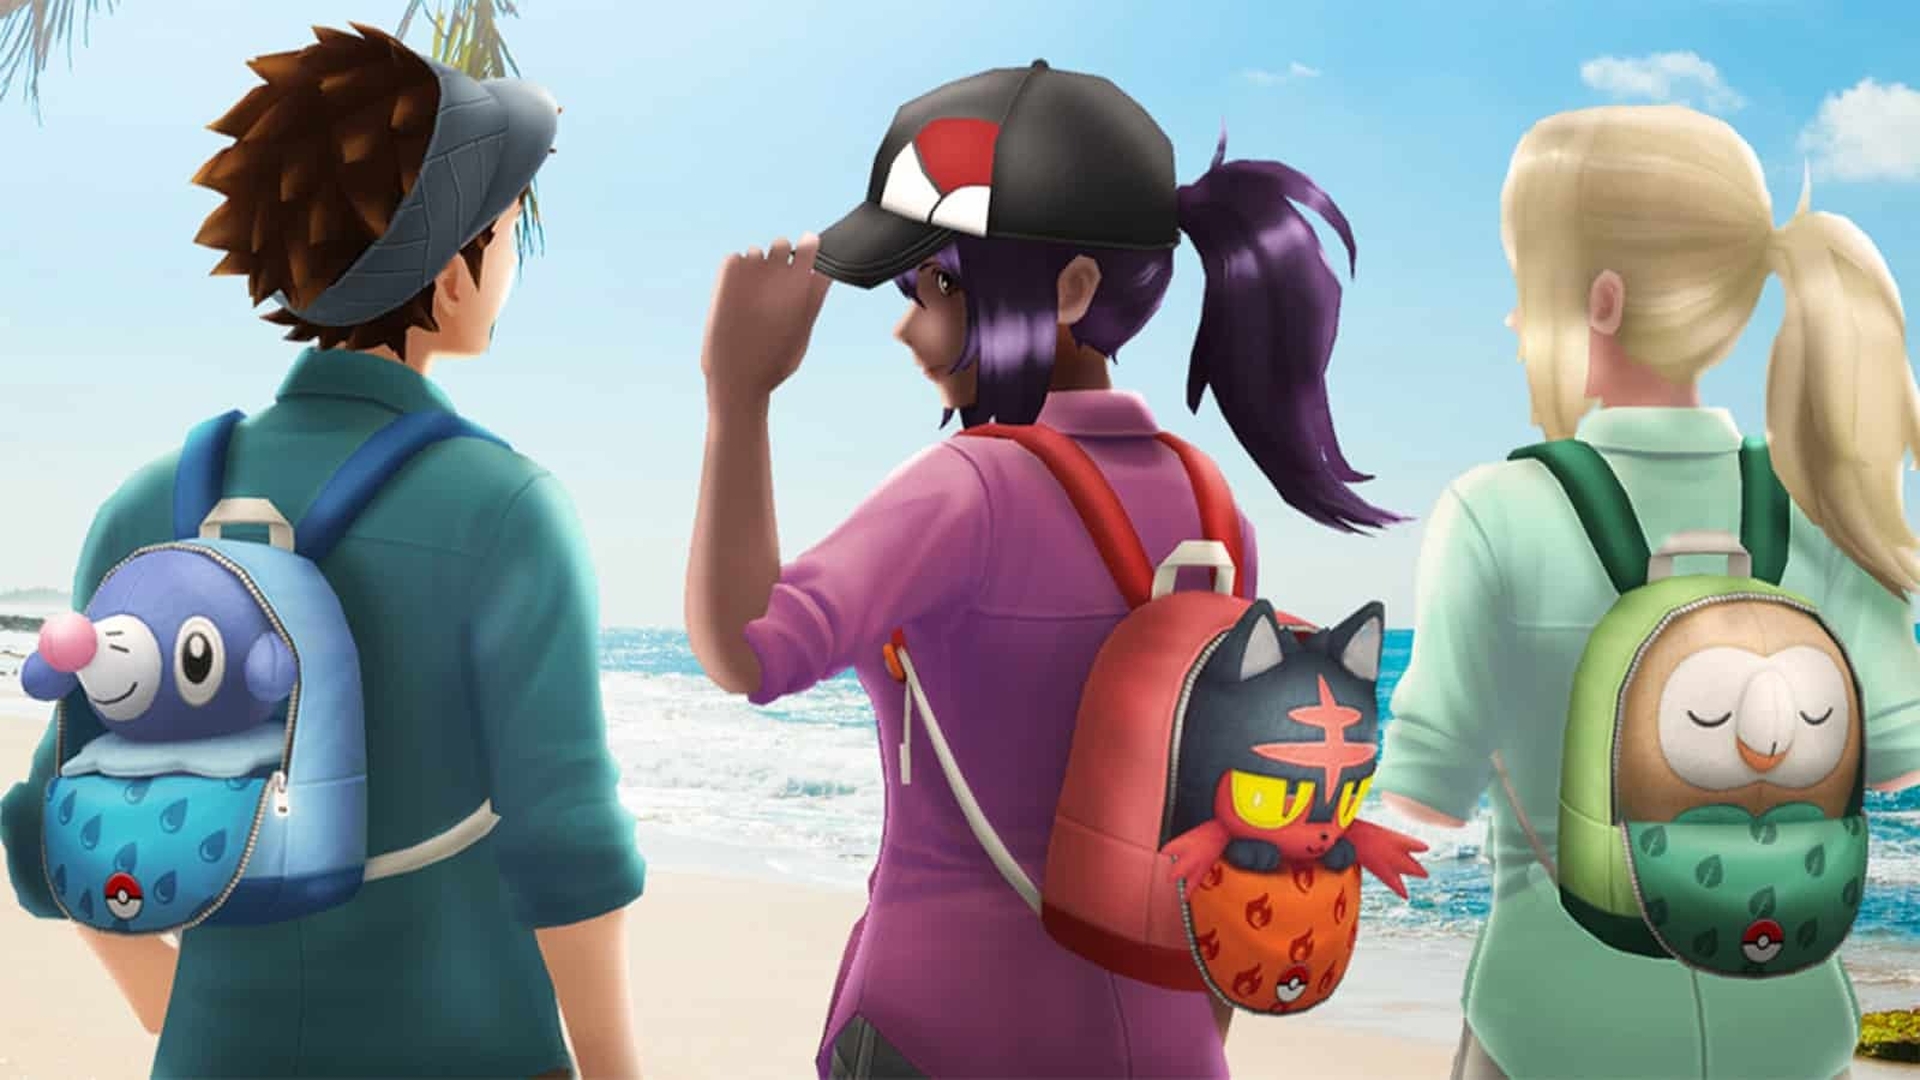 Today, we are going to cover the Alola Pokemon GO collection challenge and all of its rewards so you can have a last hurrah on the sunny shores of Alola.